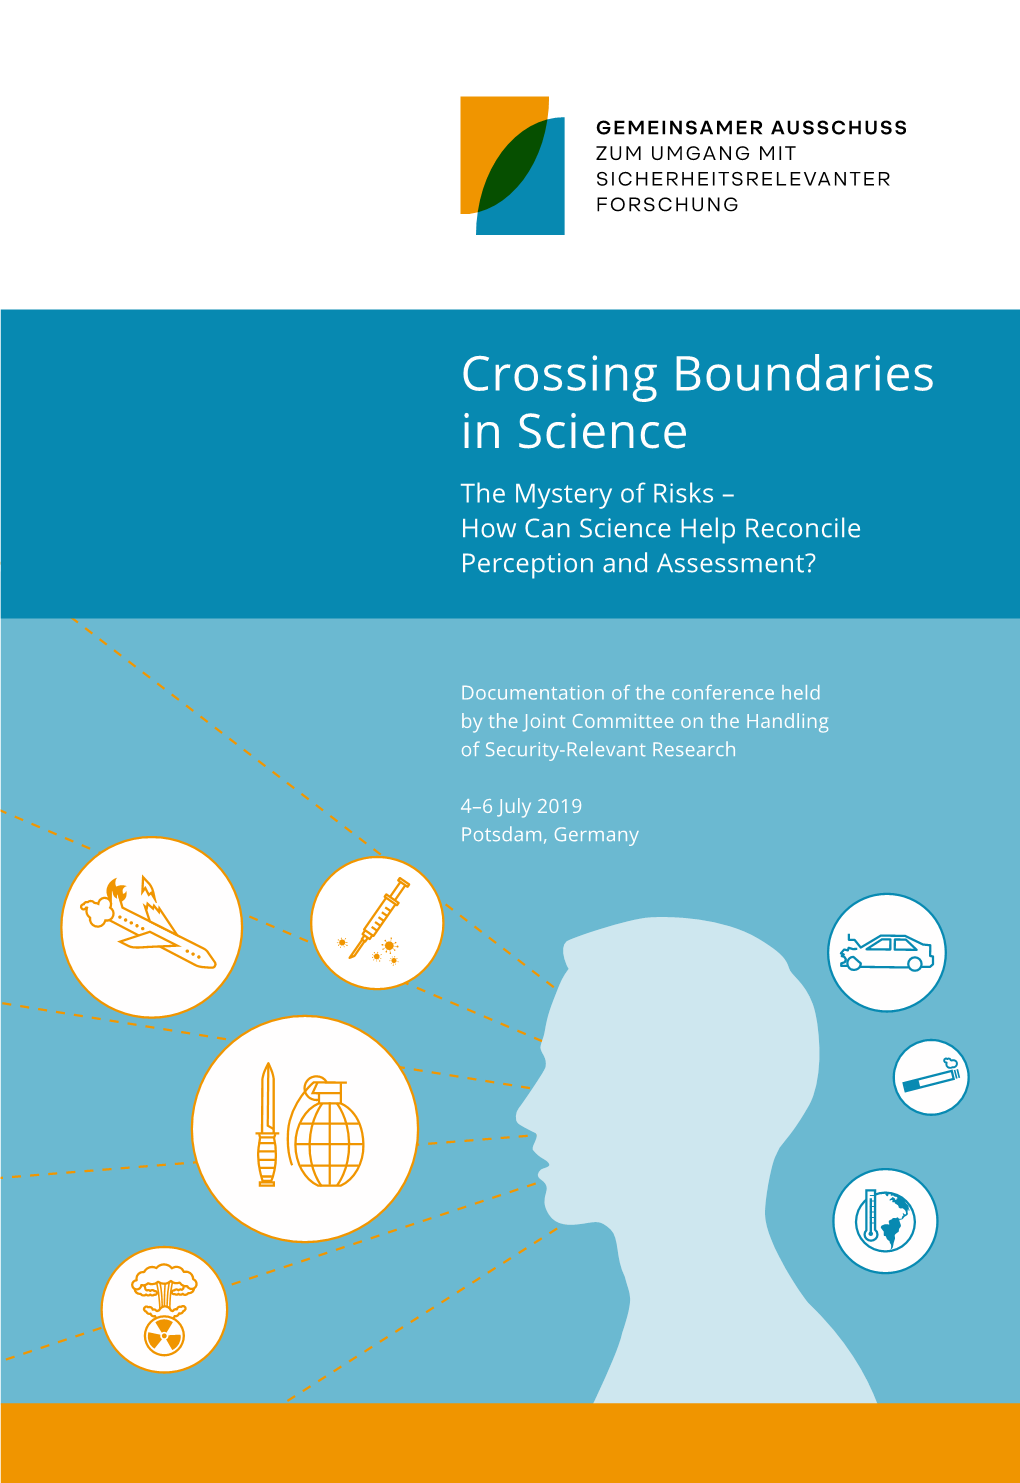 Crossing Boundaries in Science the Mystery of Risks – How Can Science Help Reconcile Perception and Assessment?